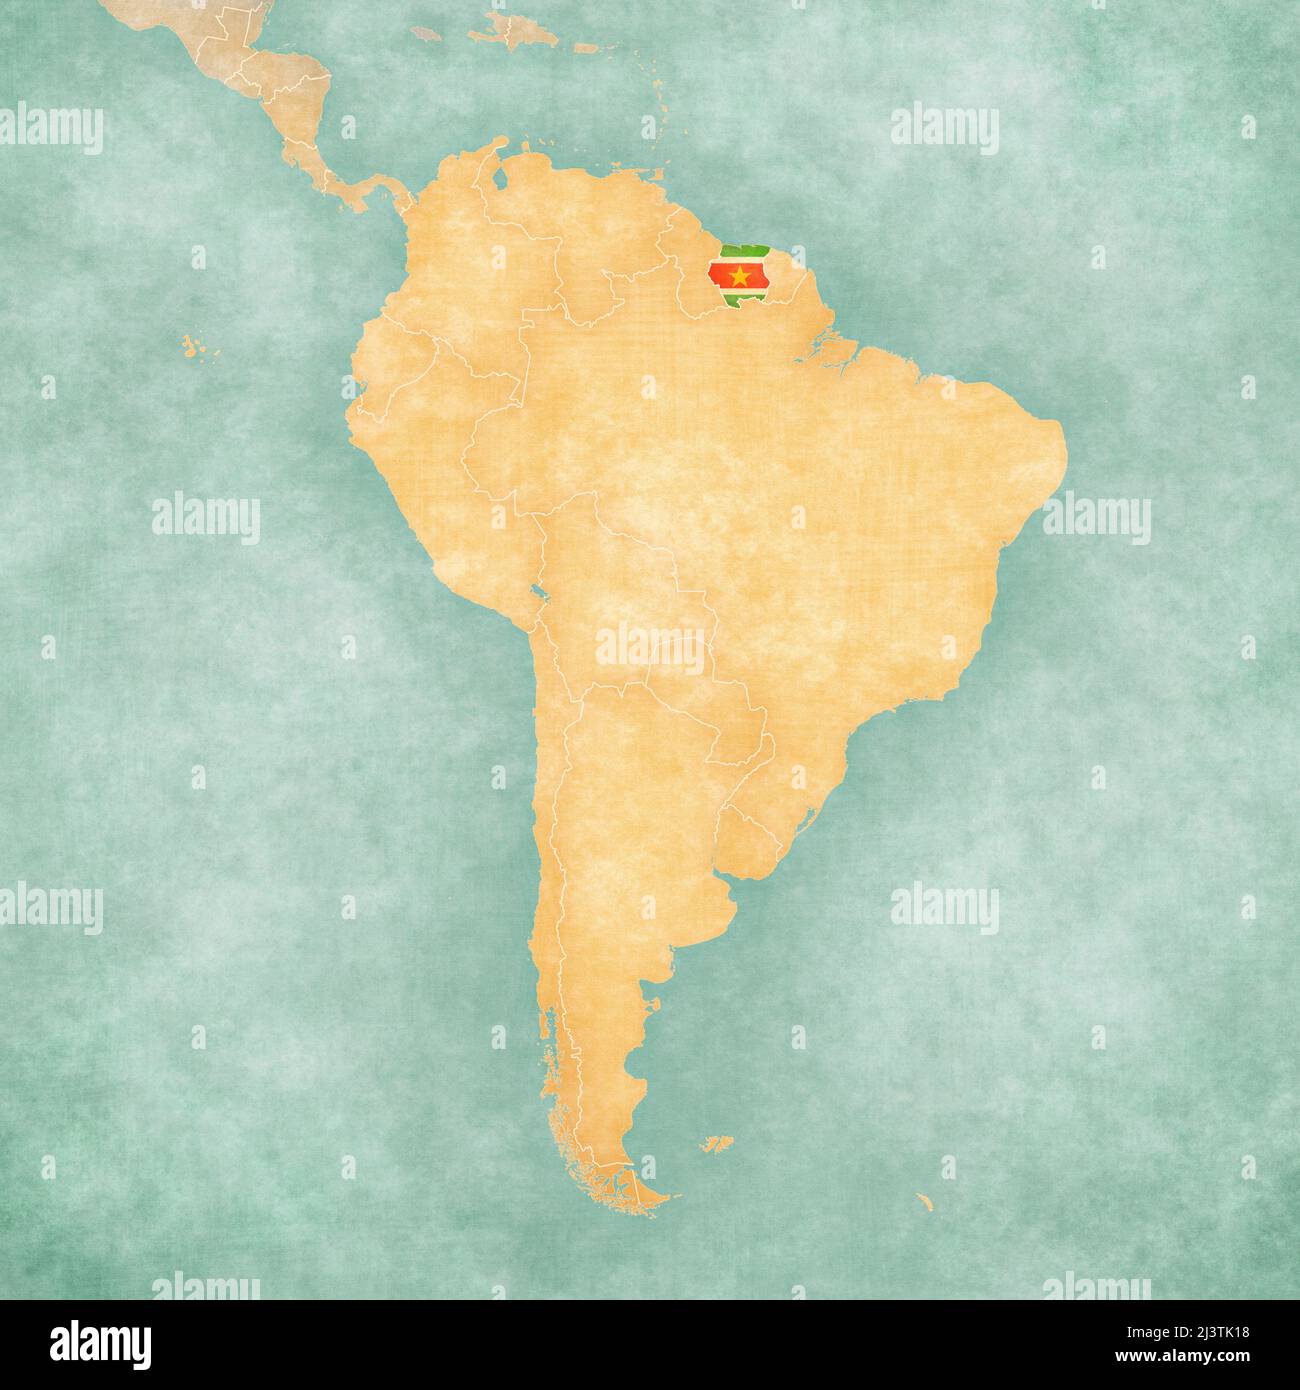 Suriname (Surinamese flag) on the map of South America. The Map is in vintage summer style and sunny mood. The map has a soft grunge and vintage atmos Stock Photo